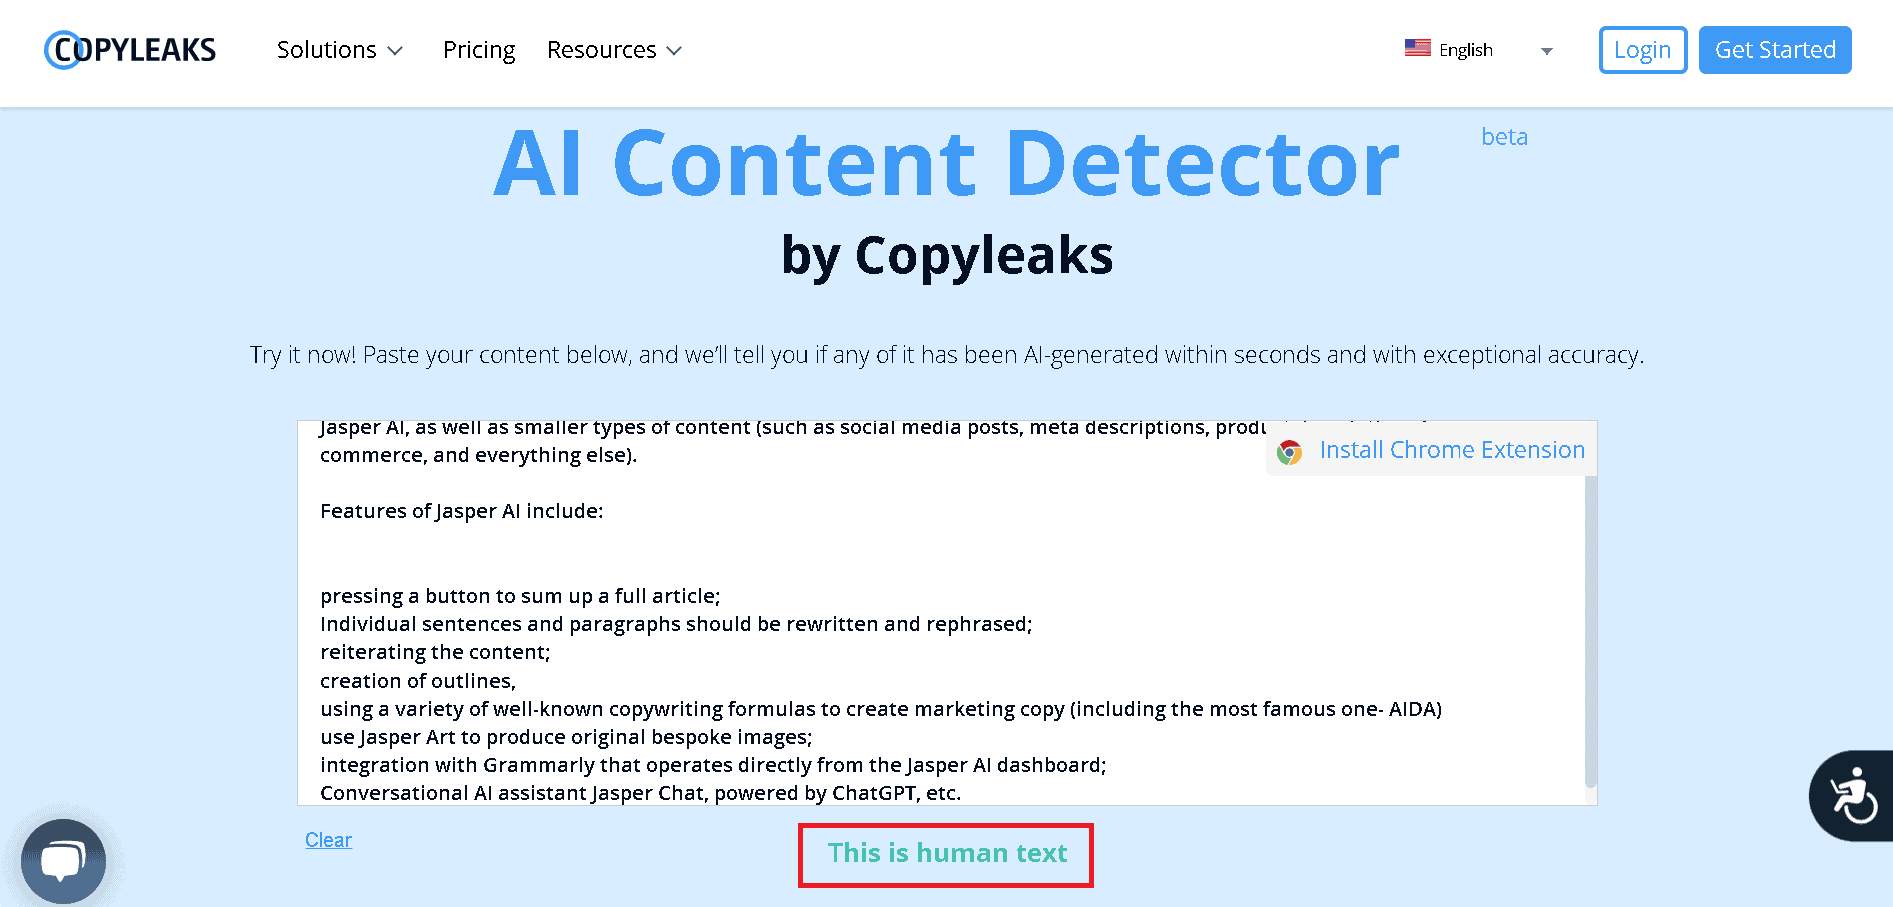 Copyleaks AI content detection app failed to detect content paraphrased by Quillbot AI